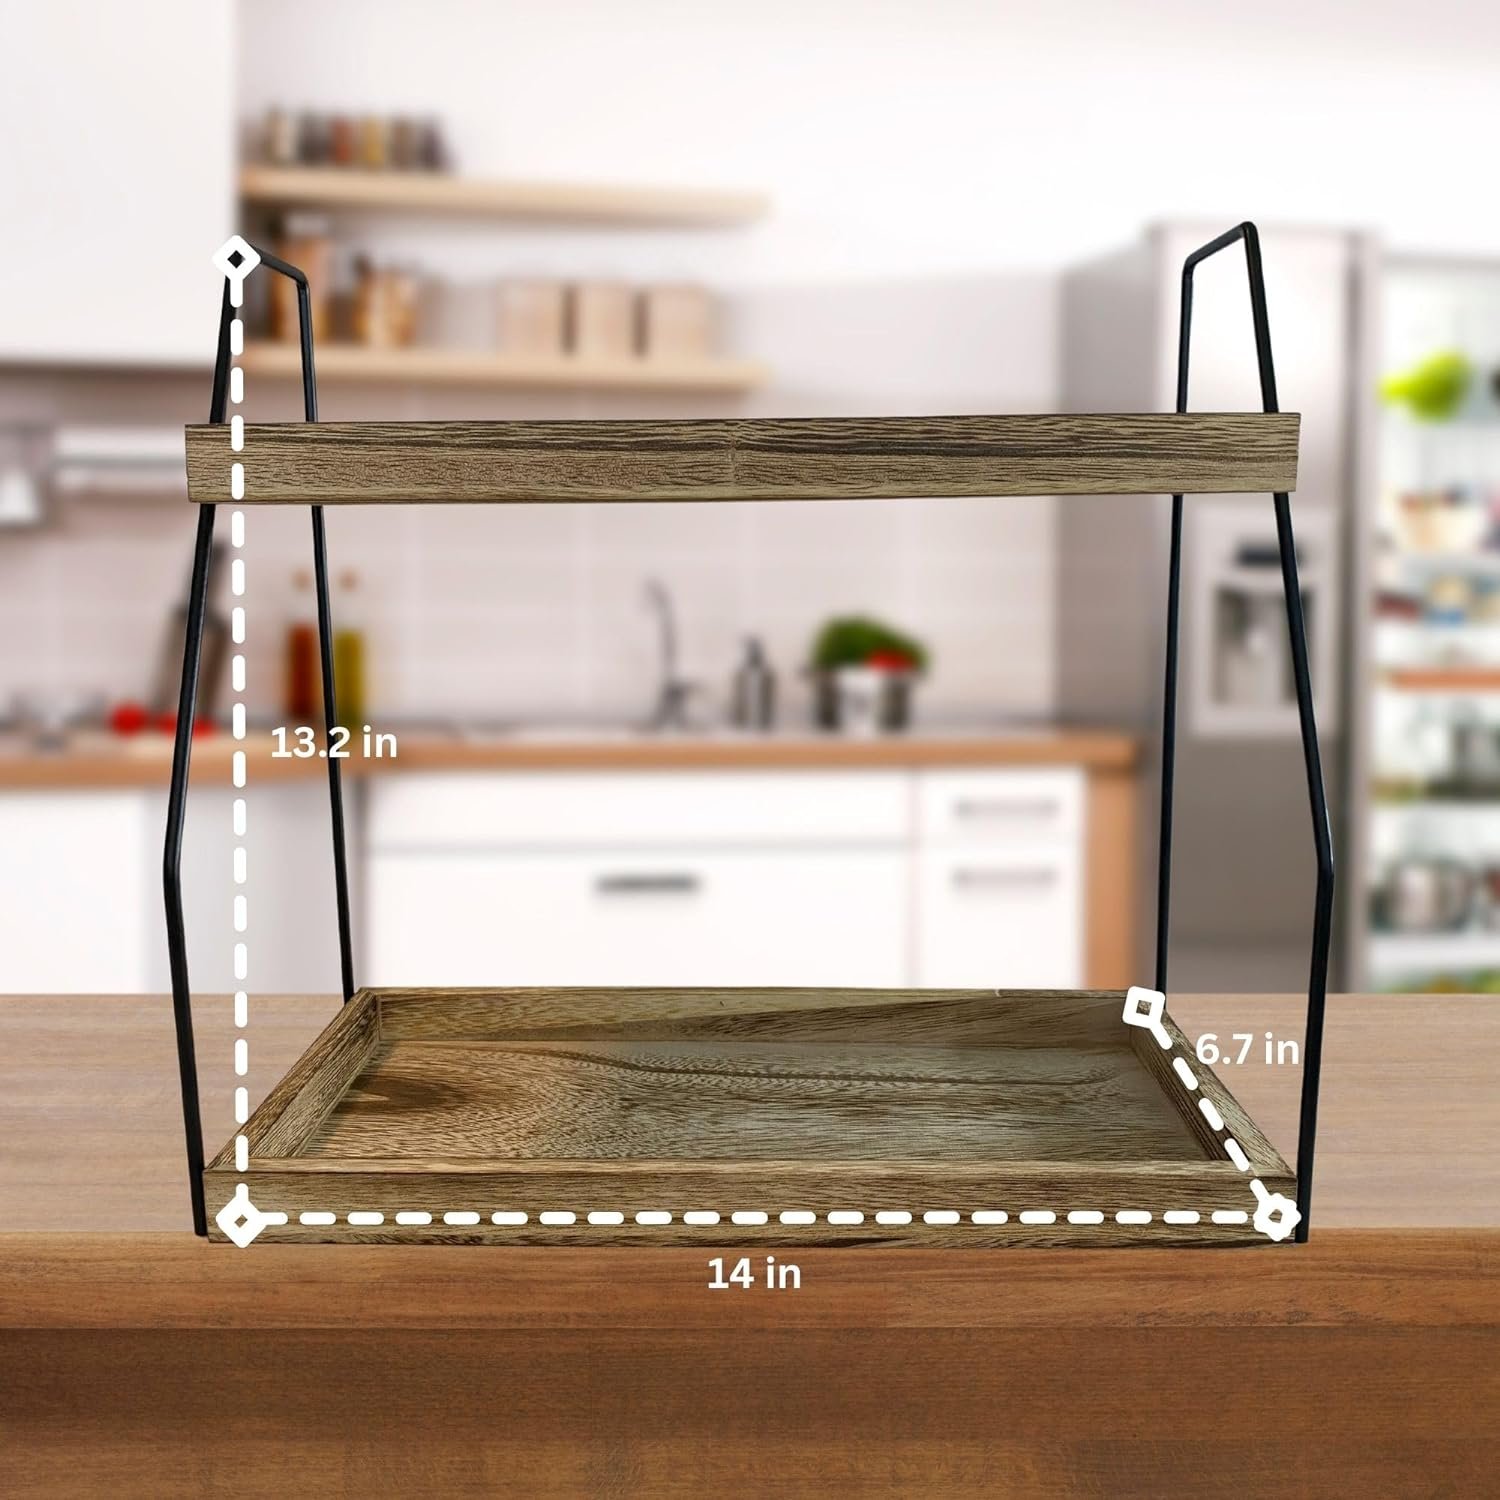 coffee organizer for countertop ideal for coffee bar station essential coffee accessories organizer for countertop use 2